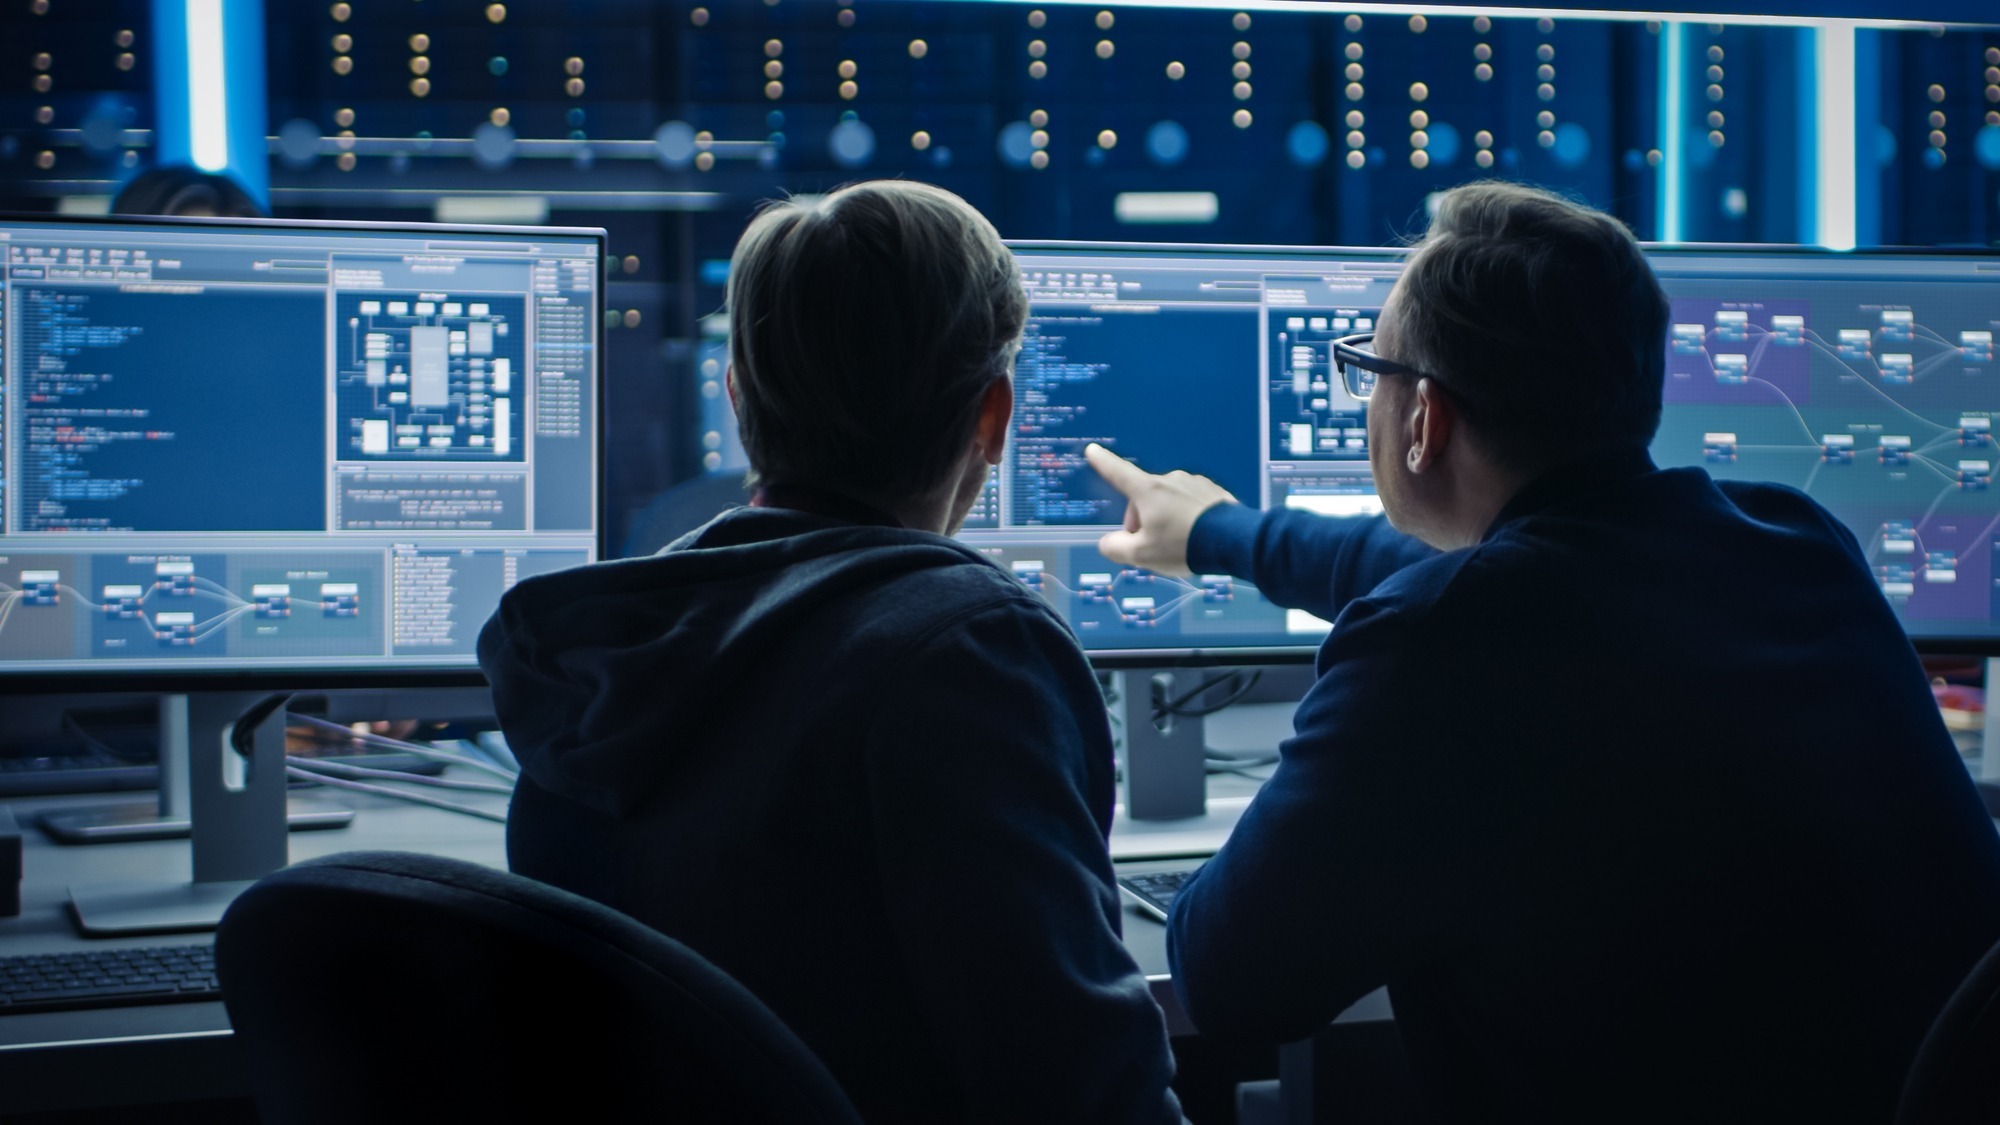  Two IT experts collaborating, one pointing to a monitor, sharing security strategy as part of comprehensive data security services